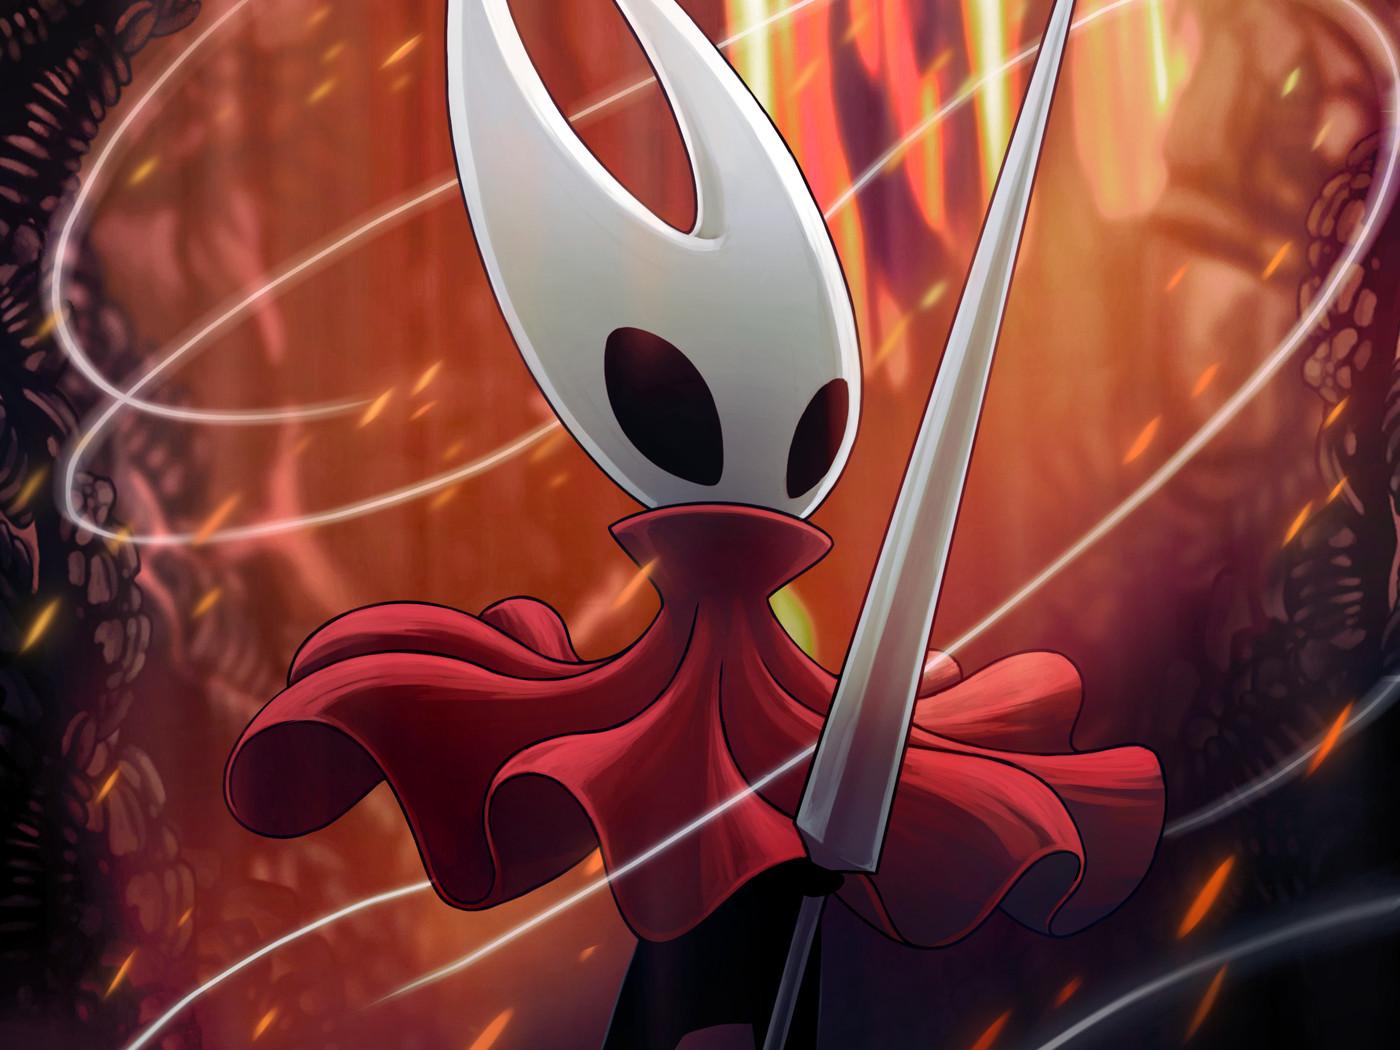 Hollow Knight: Silksong Wallpapers - Wallpaper Cave